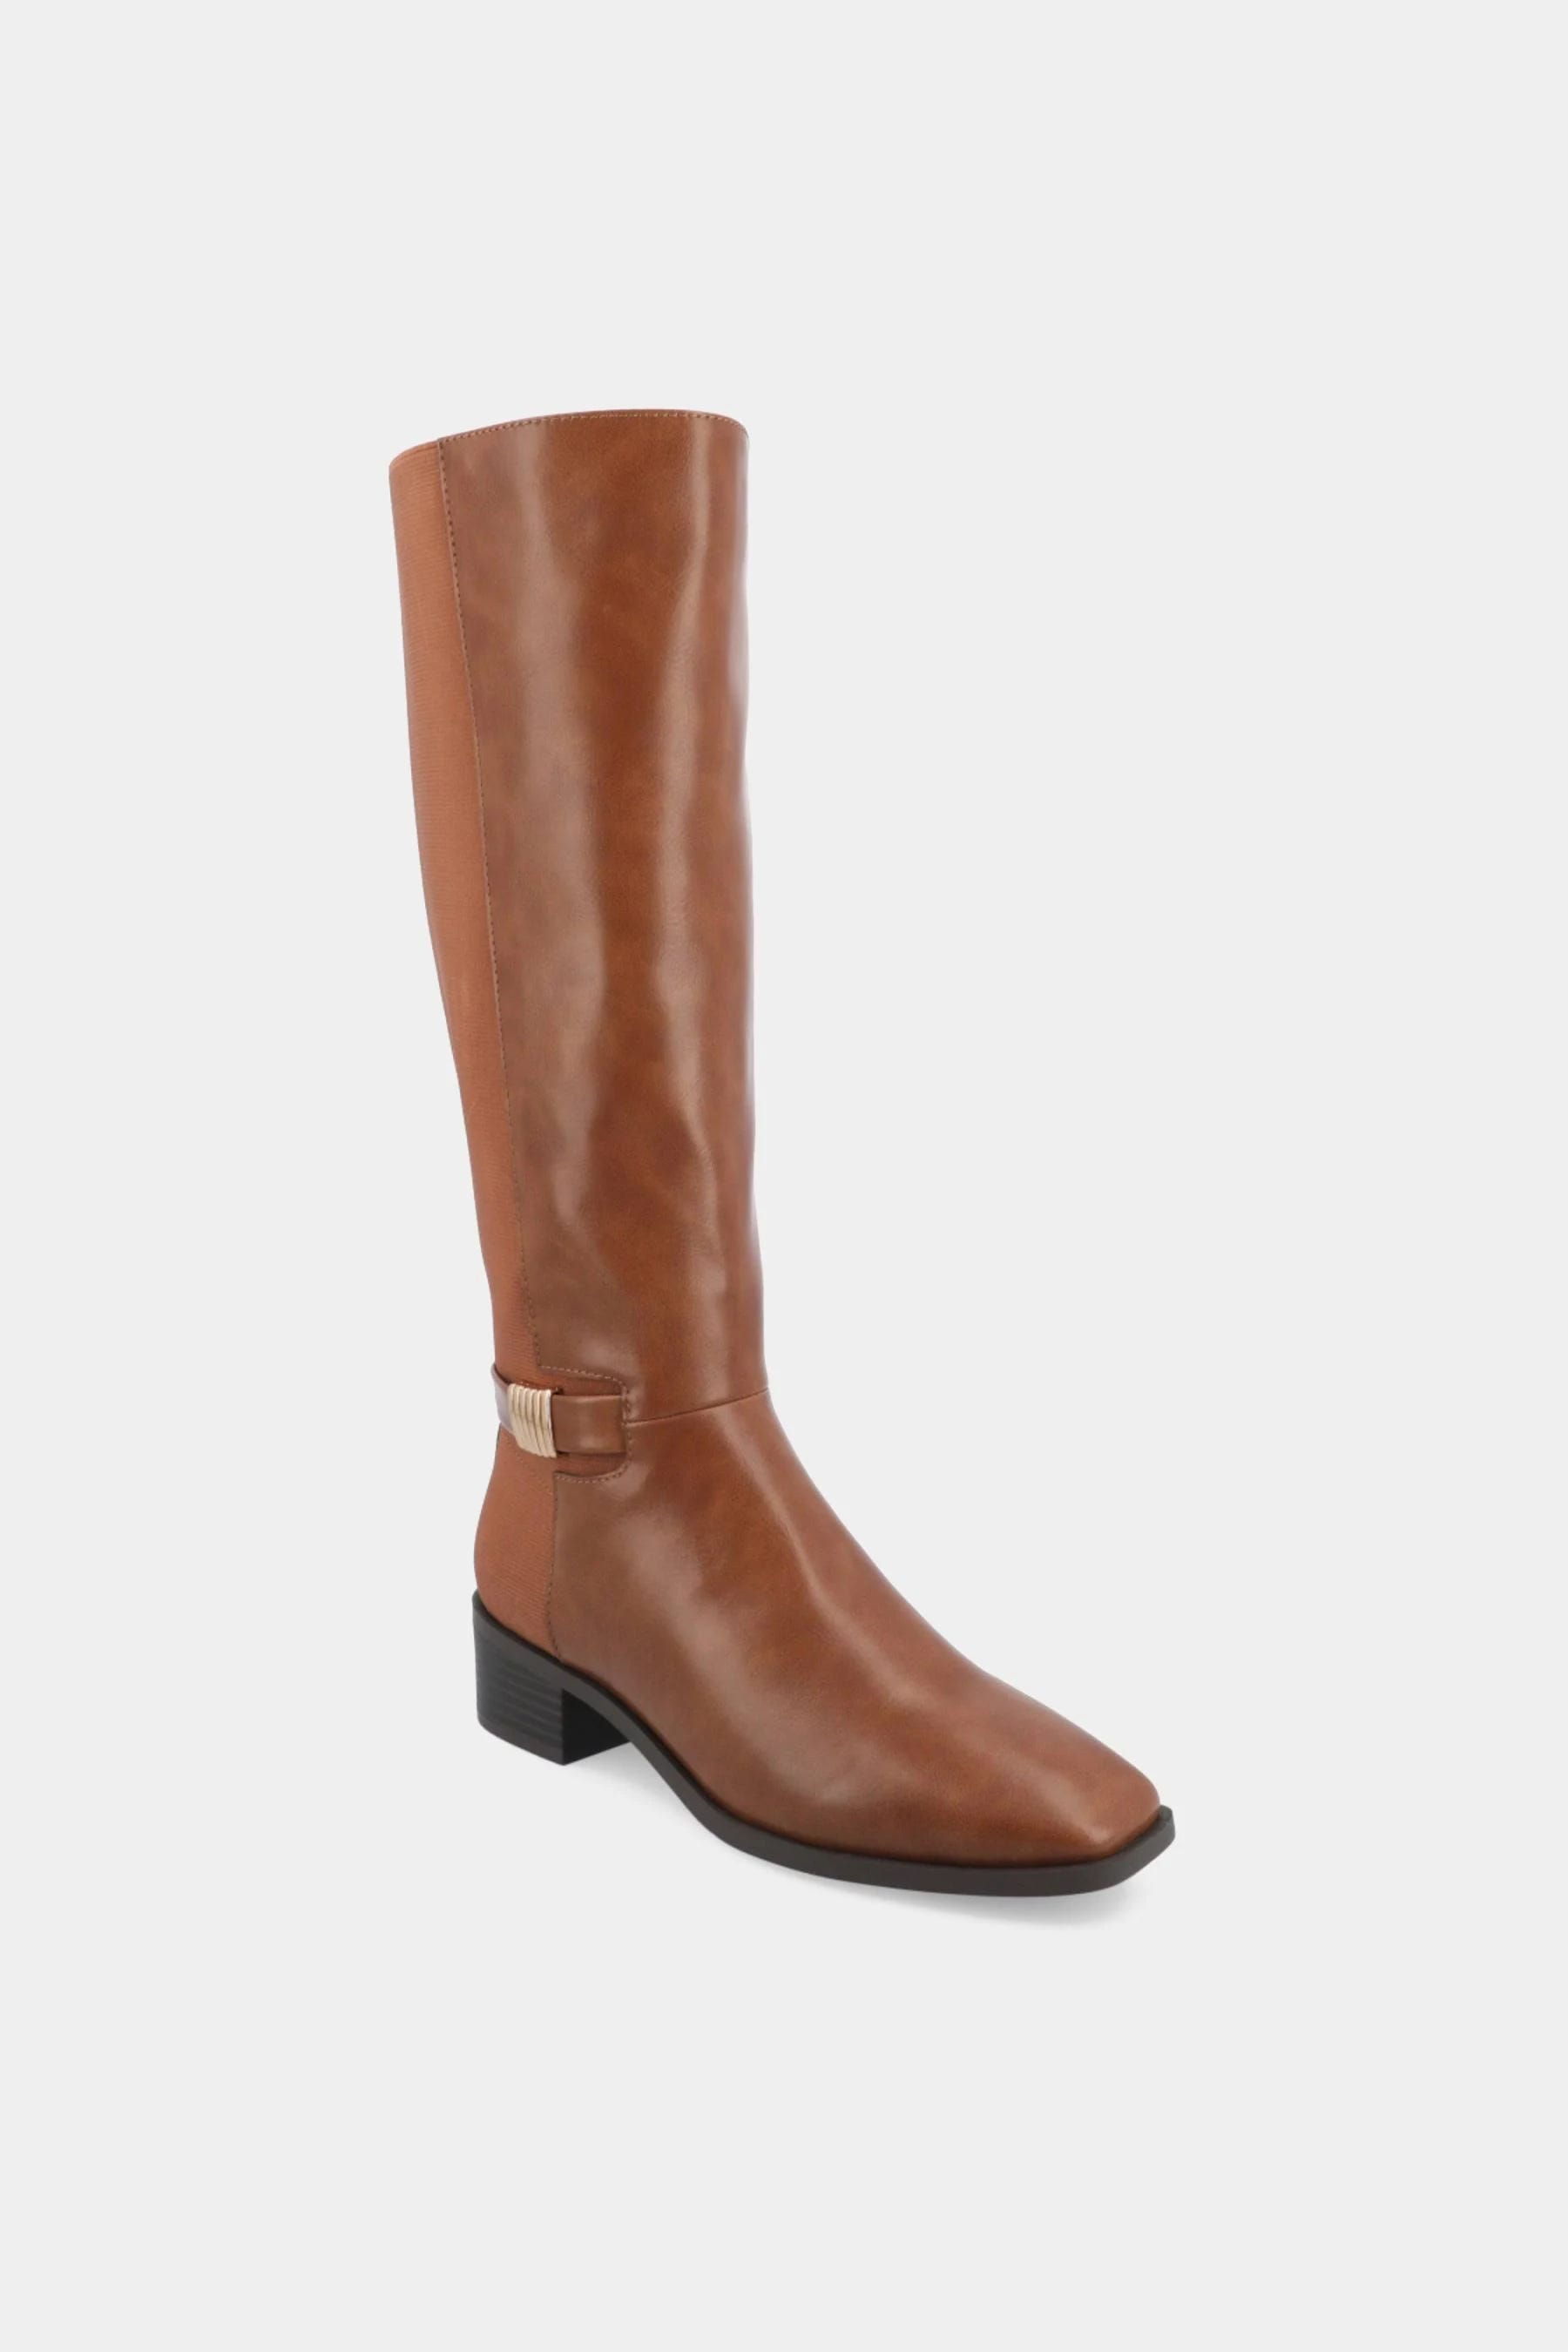 Fashionable Wide Calf Boot with 4mm Tru Comfort Insole | Image